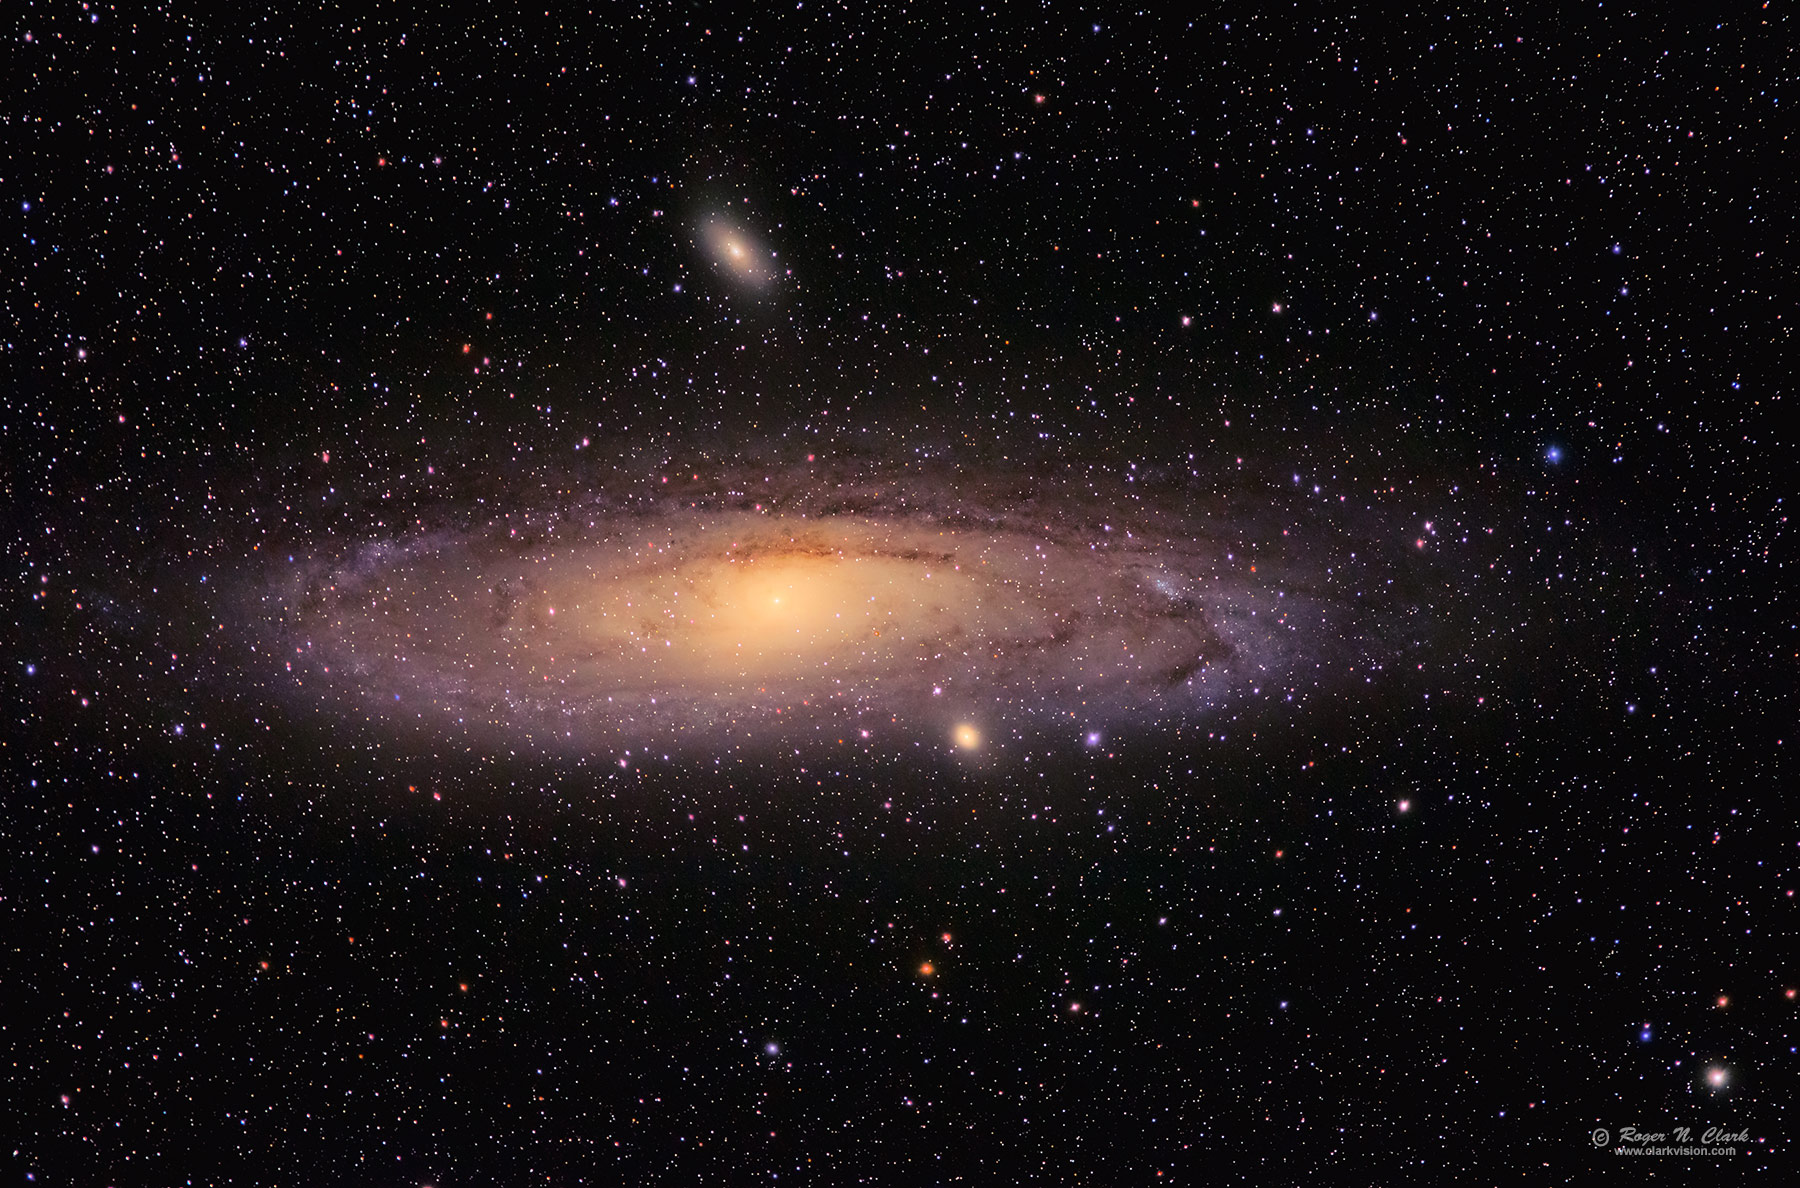 image m31.c08.13.2015.0J6A5351-86-36frames-t5c1-rs200i2rs3e1.2sc2m7200.f-1800s.jpg is Copyrighted by Roger N. Clark, www.clarkvision.com